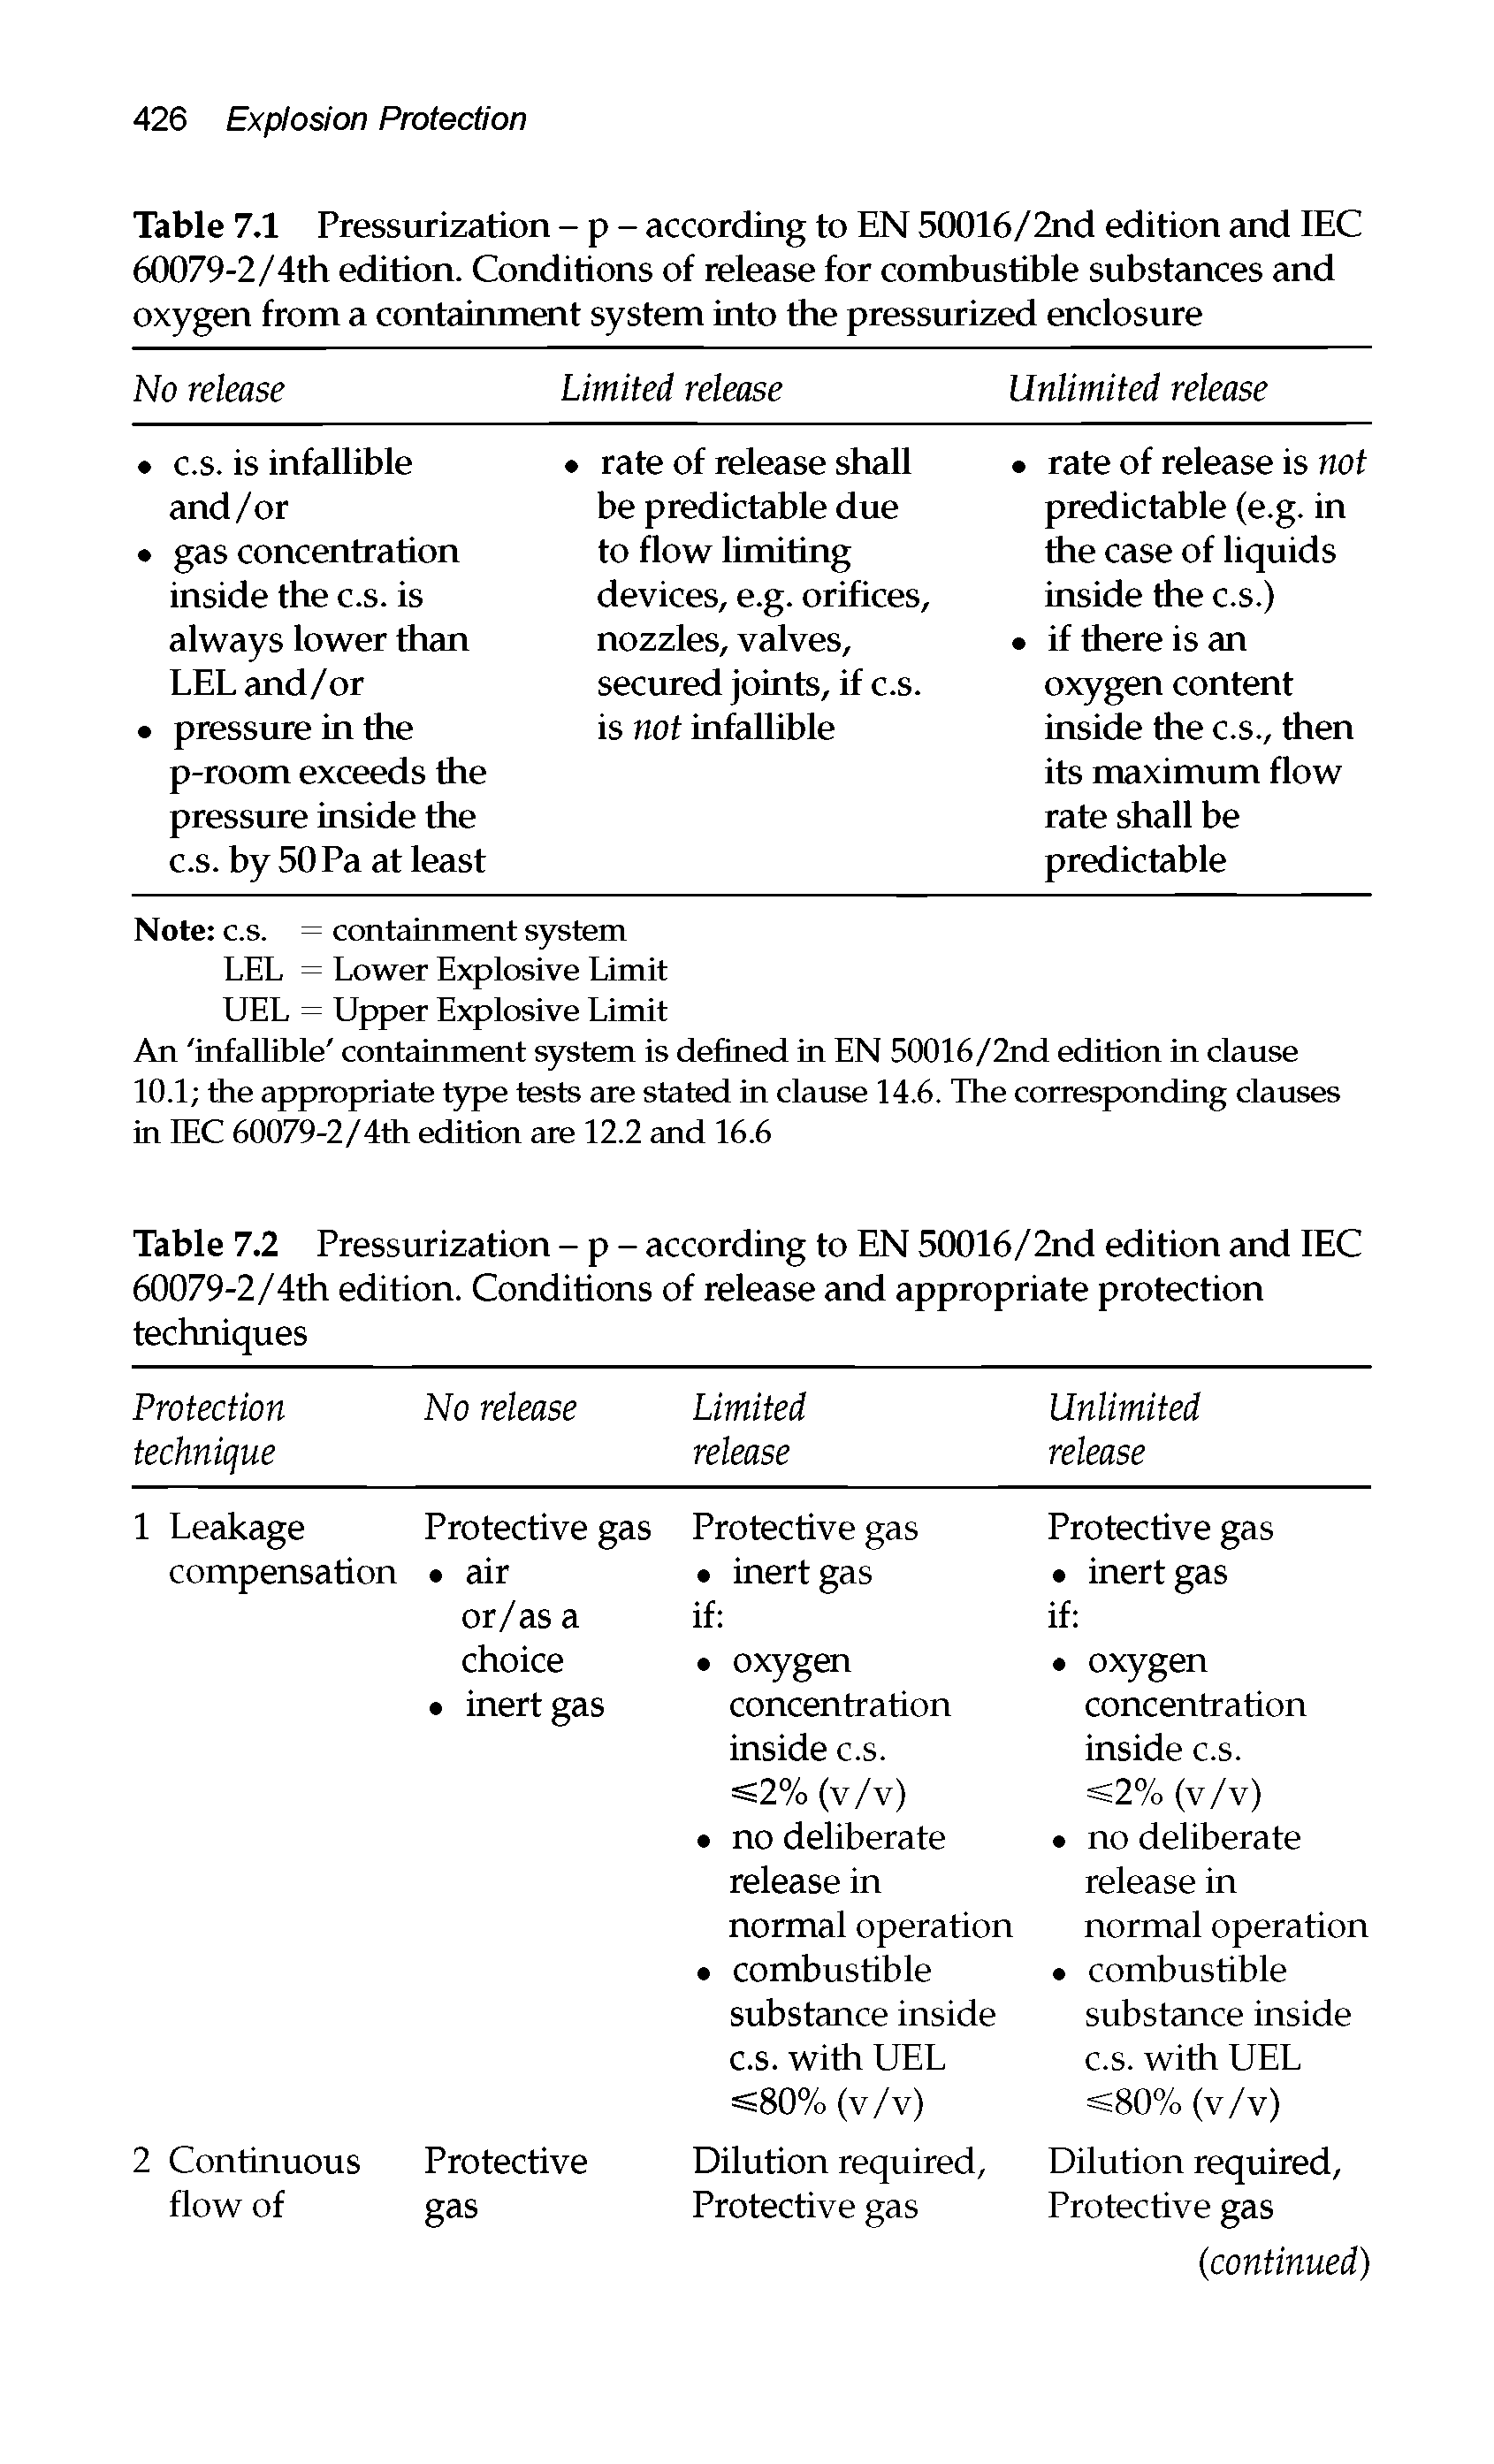 Table 7.2 Pressurization - p - according to EN 50016/2nd edition and IEC 60079-2/4th edition. Conditions of release and appropriate protection techniques...